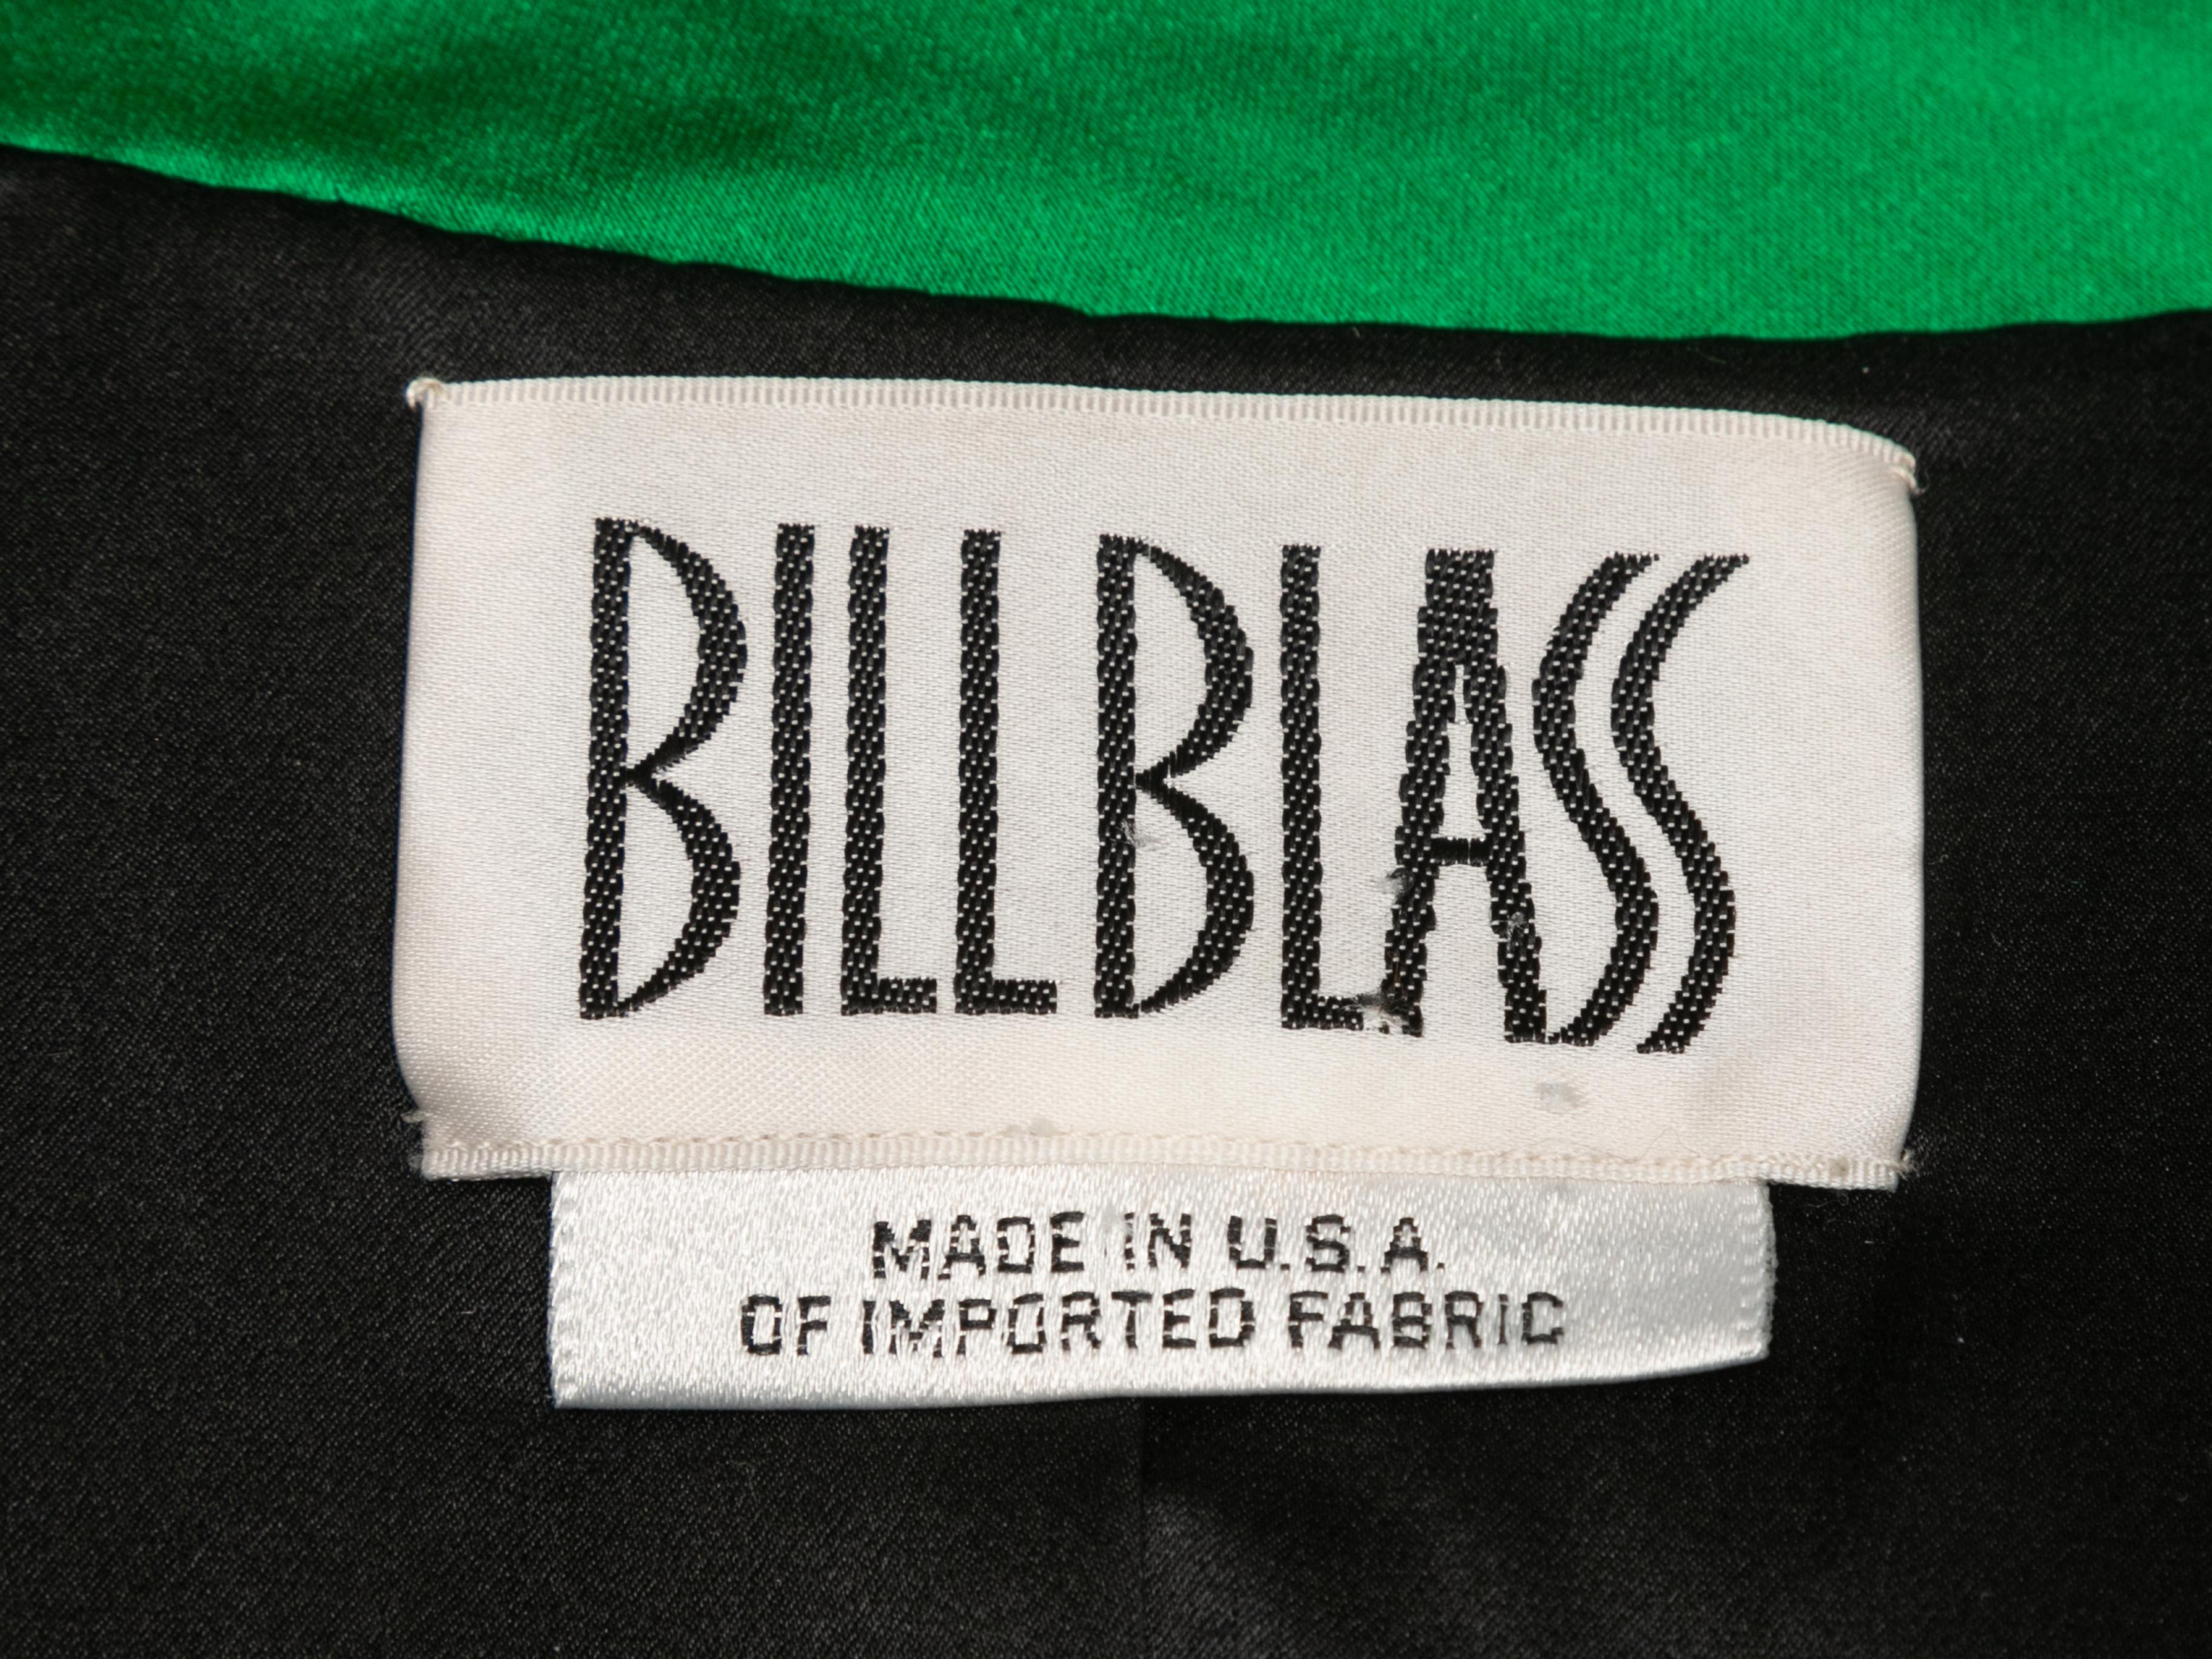 Vintage green satin jacket by Bill Blass. Pointed collar. Four front pockets. Button closures at front. 44